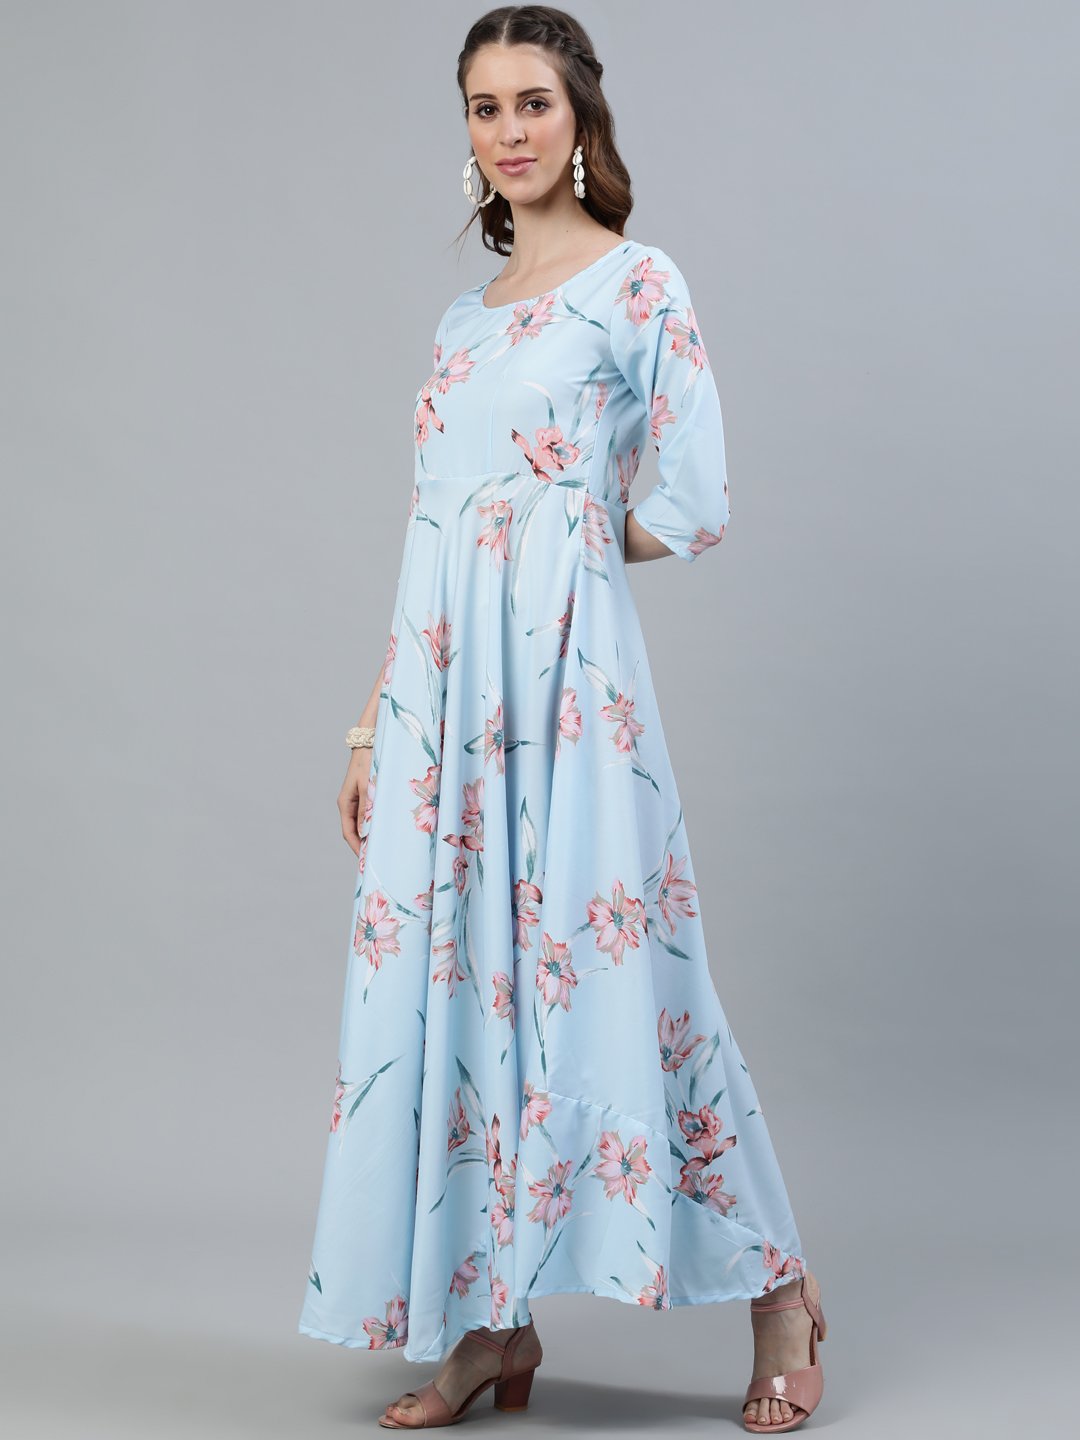 Women's Pastel Blue Floral Printed Maxi Dress With Three Quarter Sleeves - Nayo Clothing